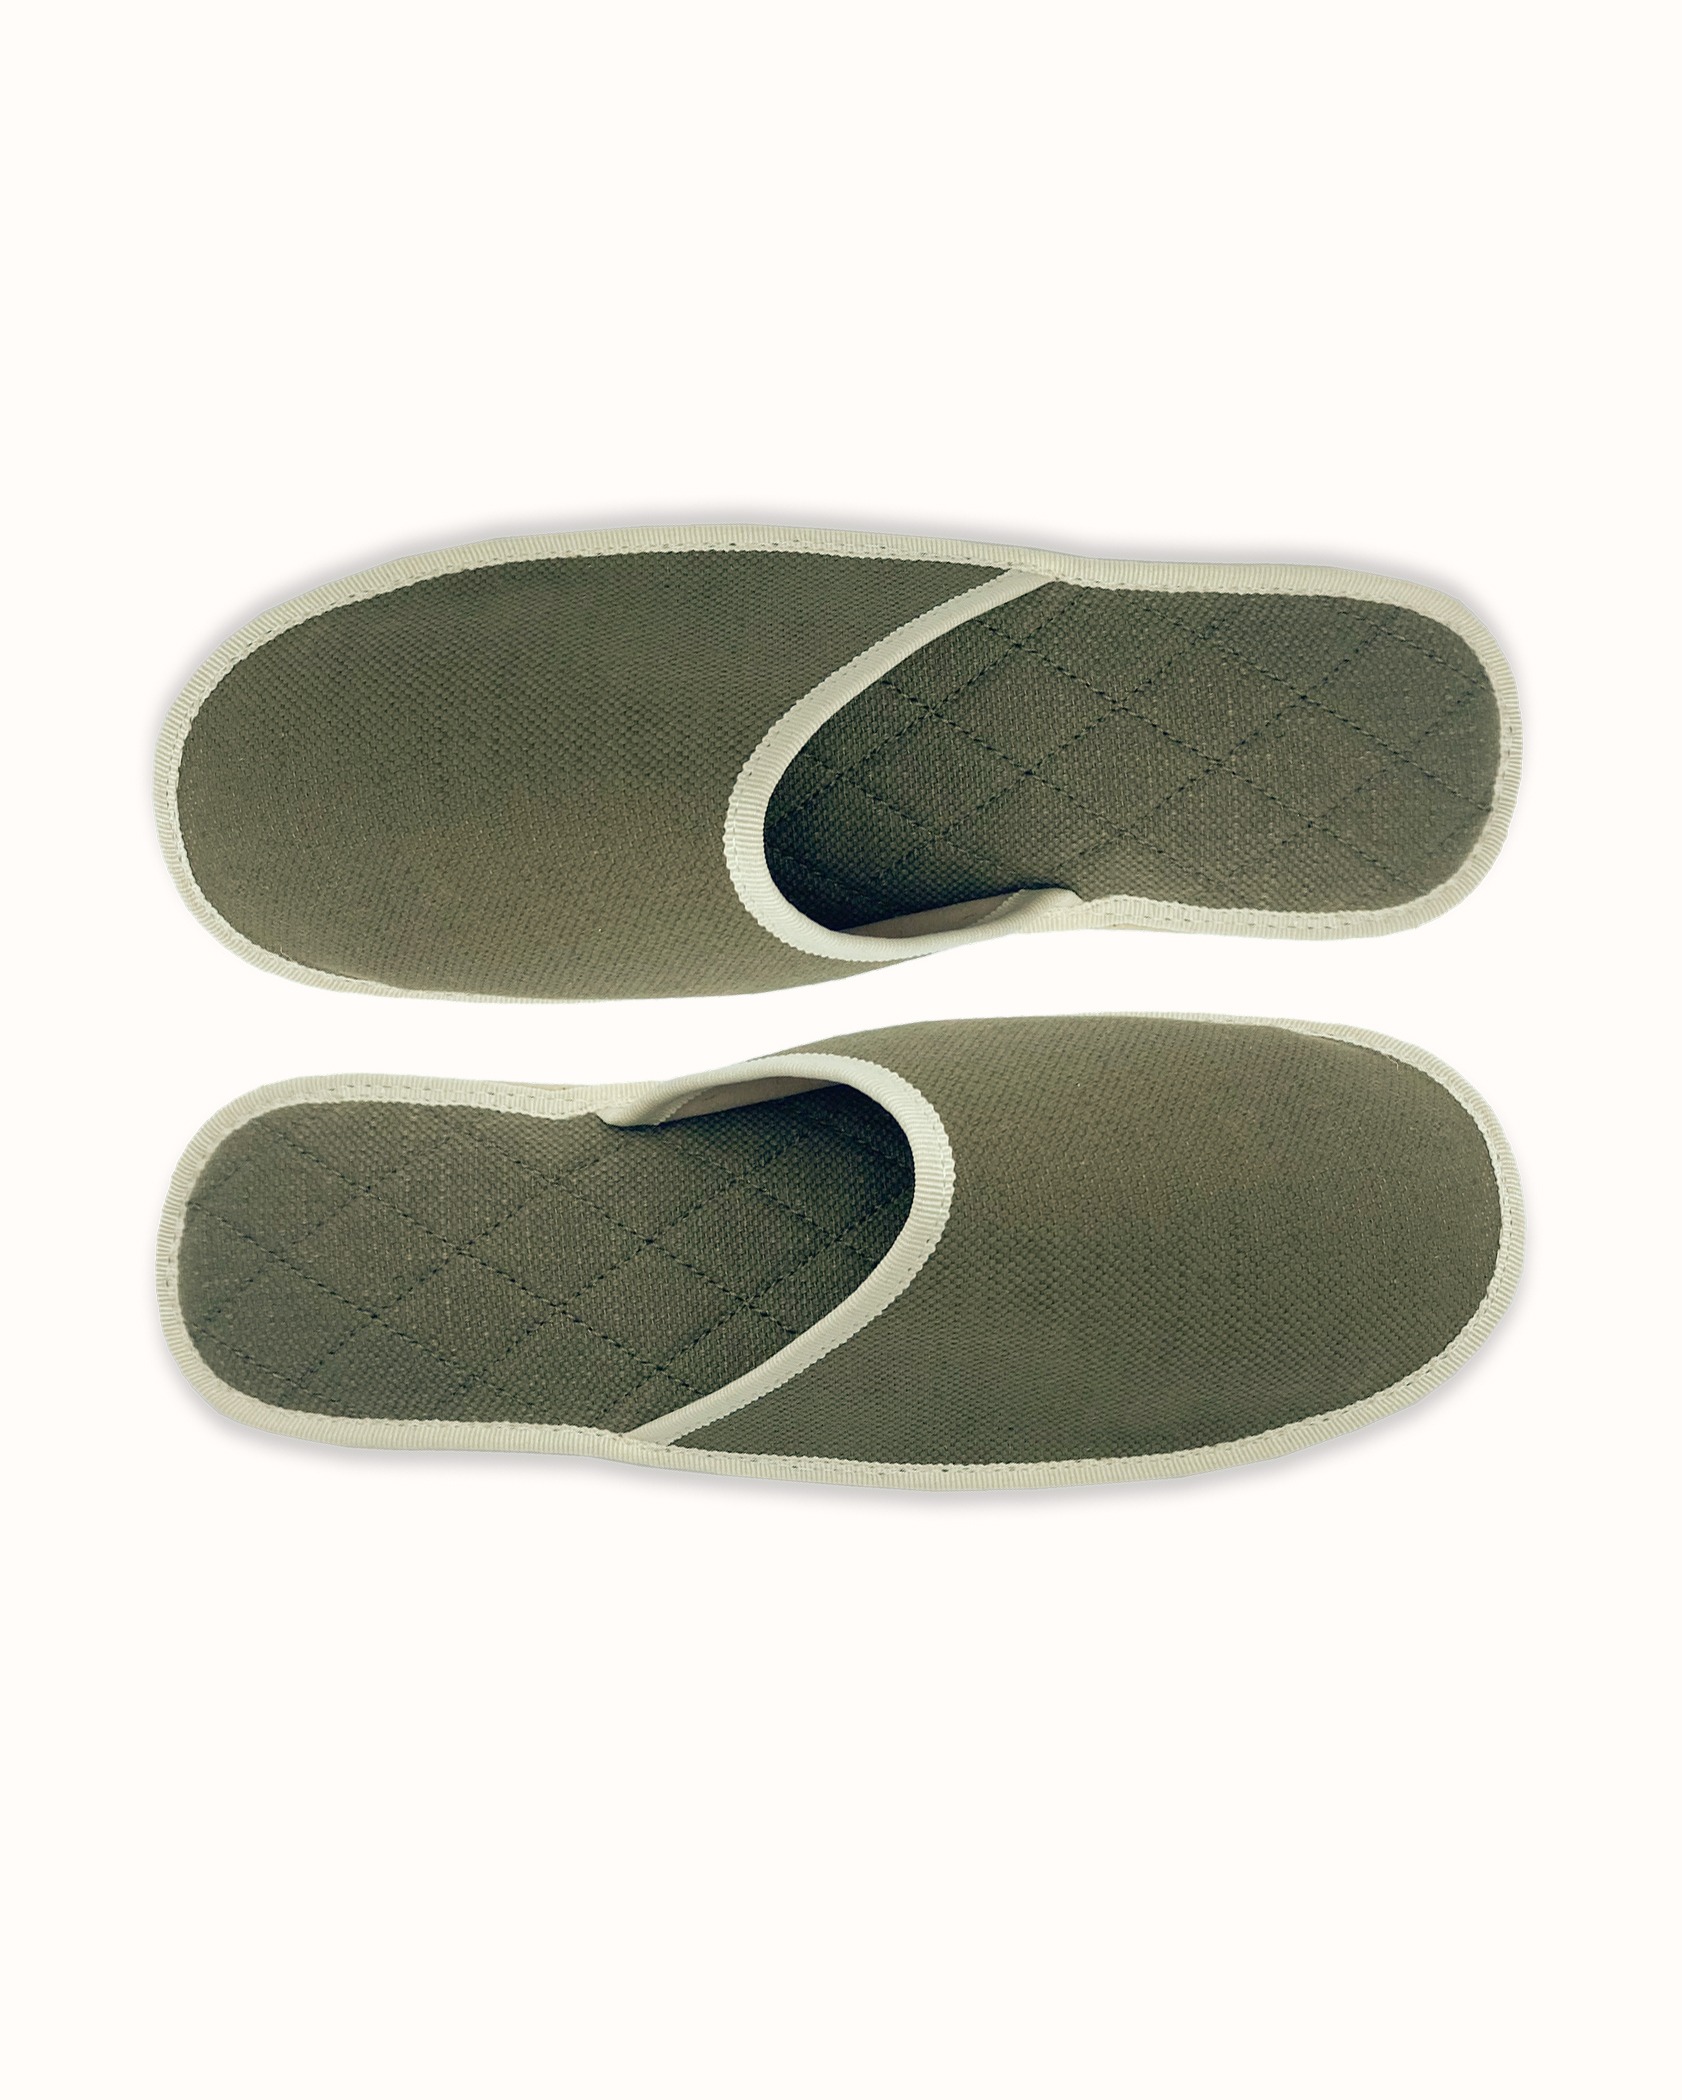 French slippers for men, women and kids. Le Spleen "Insomnie", green and white. A slip-on like hotel slippers with a quilted padding and an outstanding craftsmanship manufacturing. Made in France.